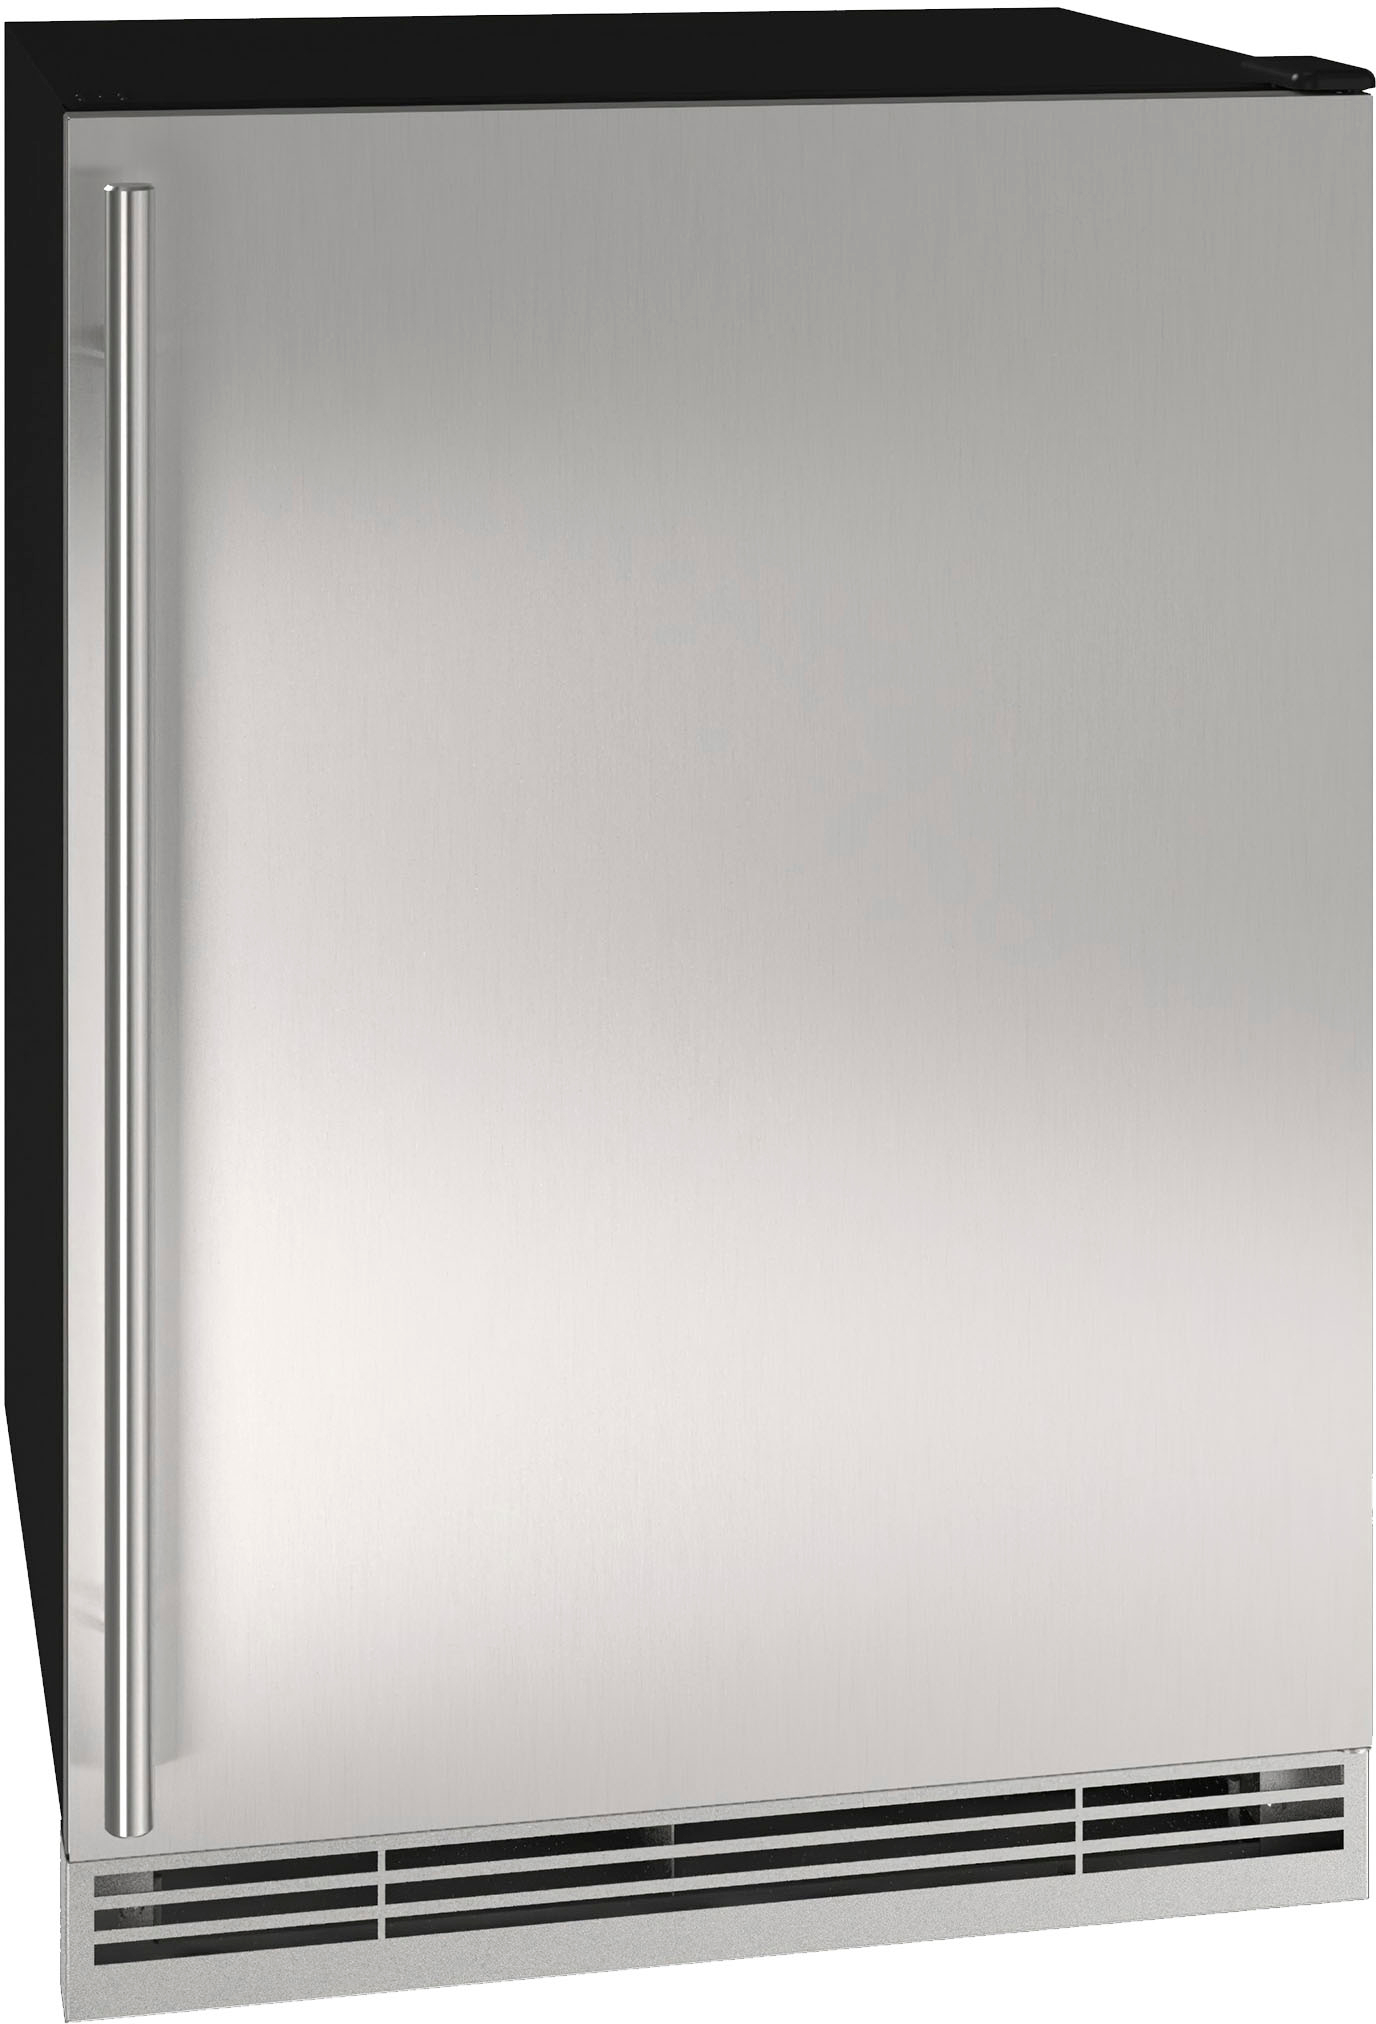 Angle View: U-Line - 1 Class 4.2 Cu. Ft. Undercounter Refrigerator with Ice Maker - Stainless steel